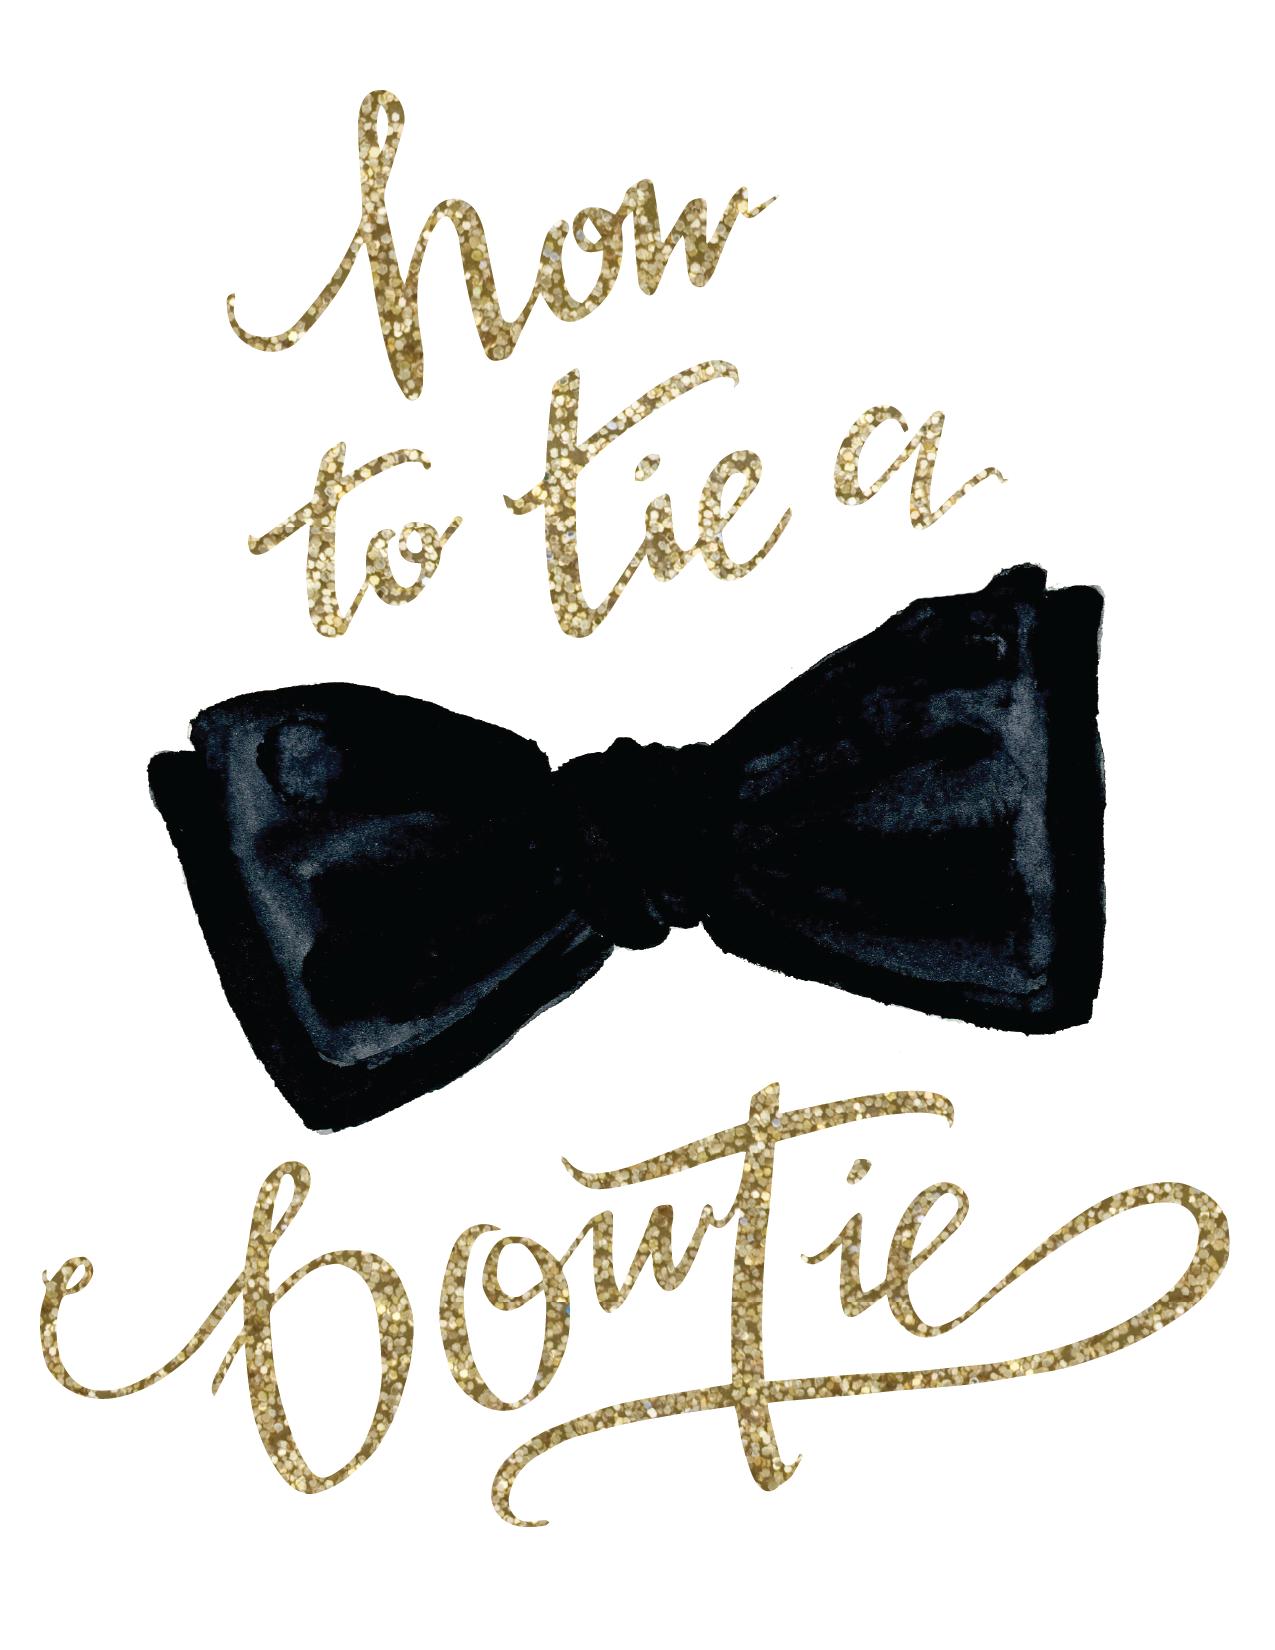 How to Tie a Bow Tie (or 'Tie Him Up') from Annie Dean